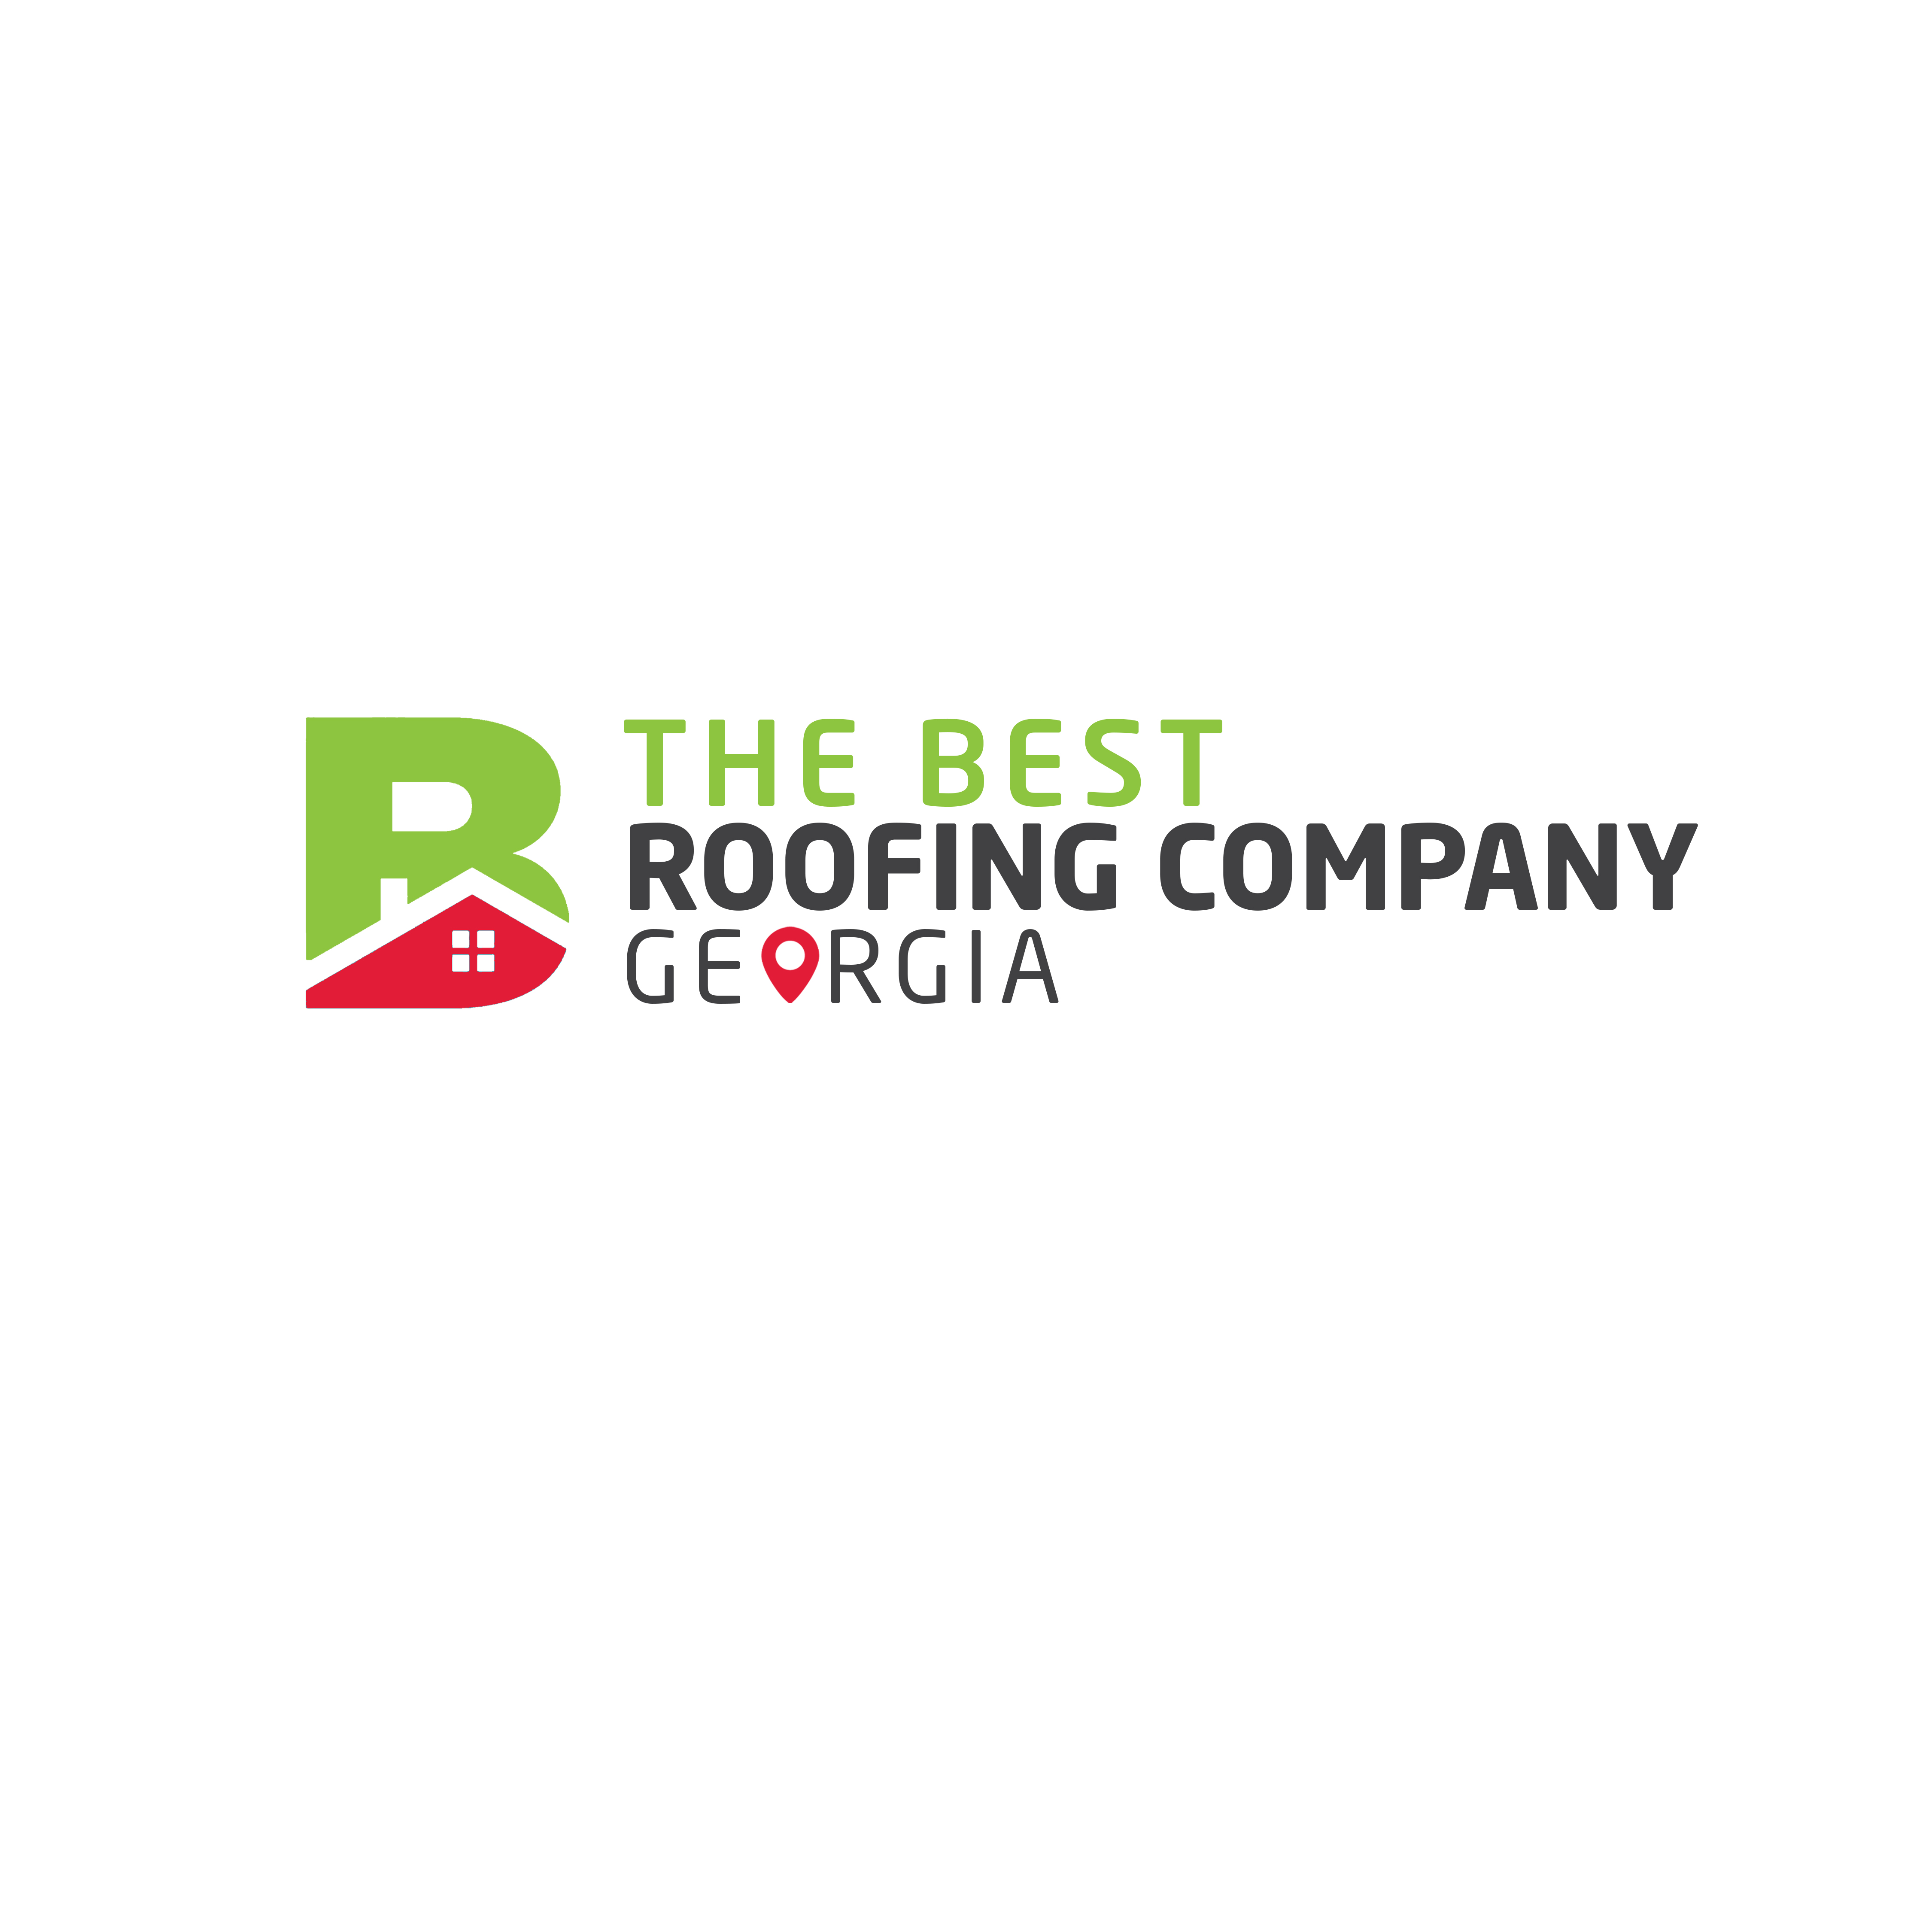 The Best Roofing Company Georgia